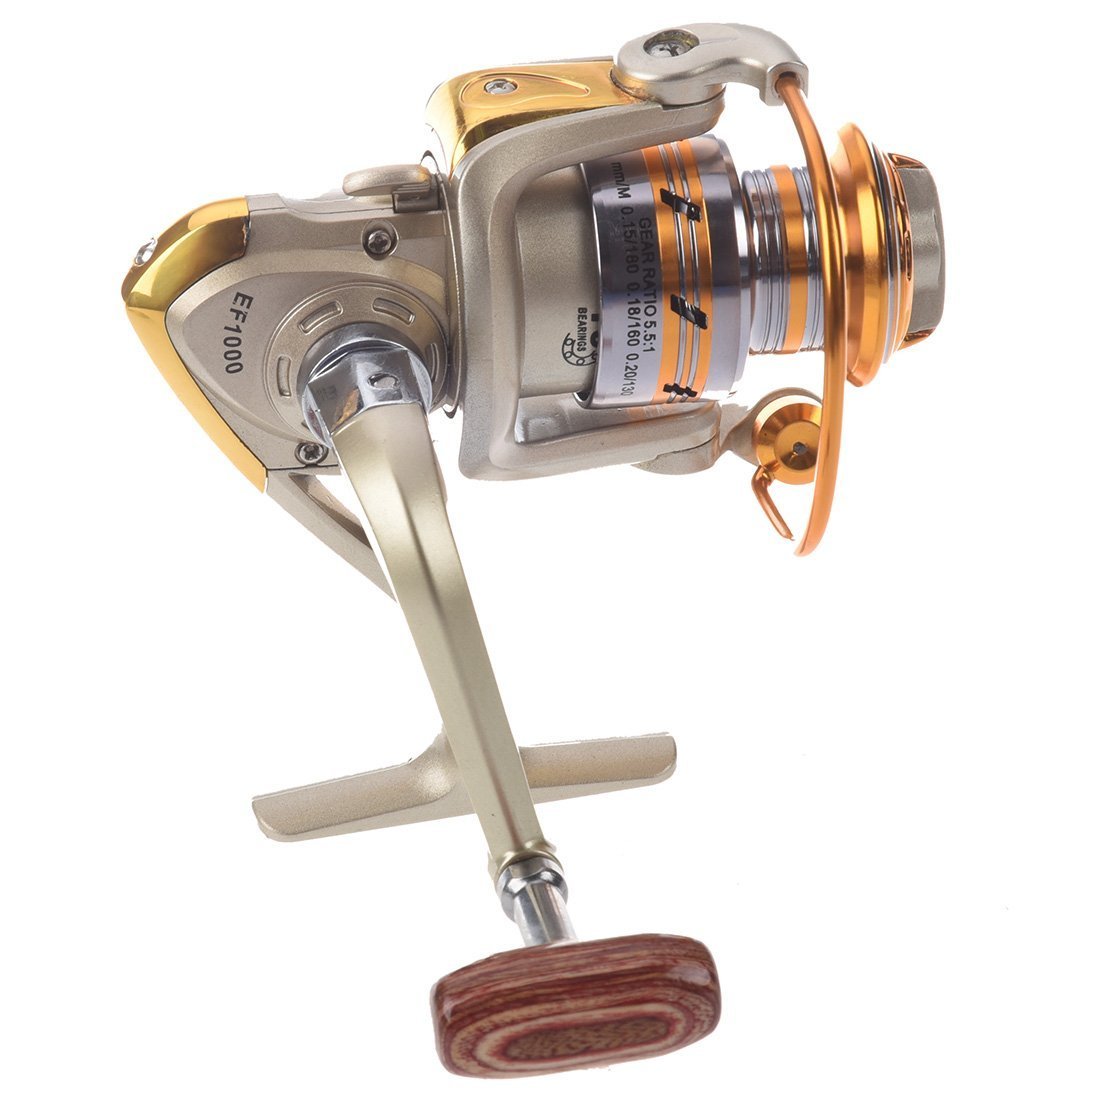 Spool Aluminum Spinning Fly Fishing Reel Baitcasting Fishing Reels Saltwater-Spinning Reels-Life Going Keep Riding Store-1000 Series-Bargain Bait Box